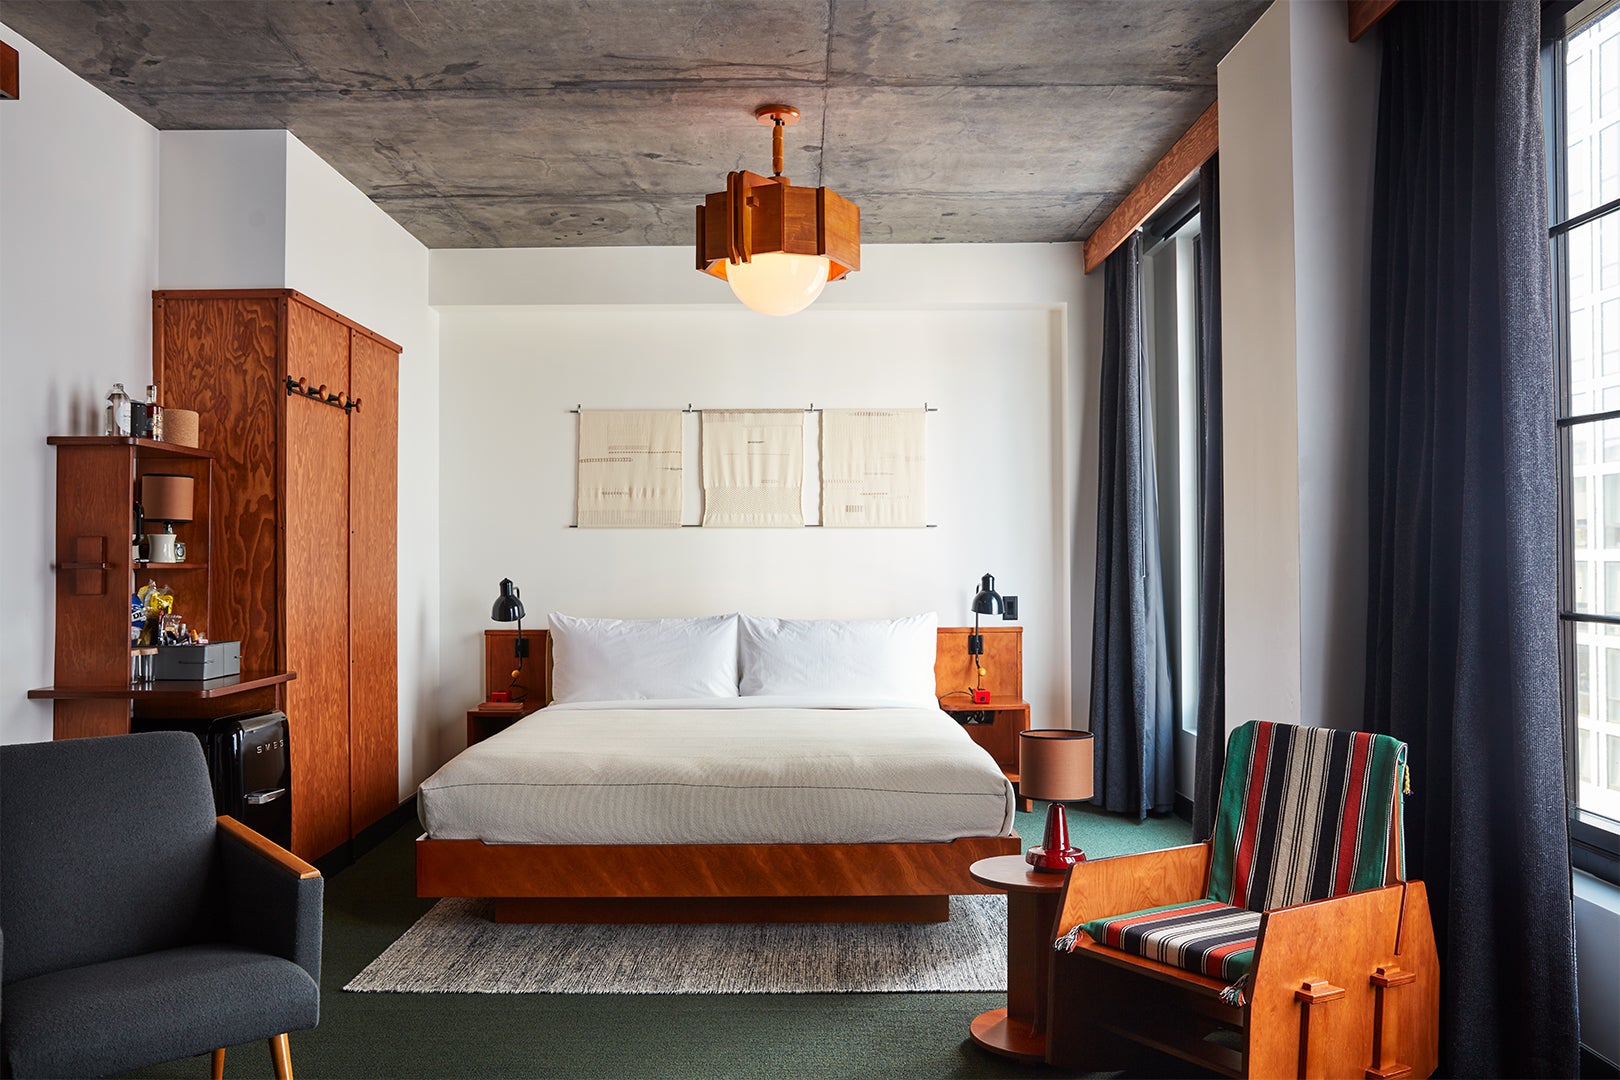 One of the Best Hotels In New York City Lets You Customize Your Guest Room Layout